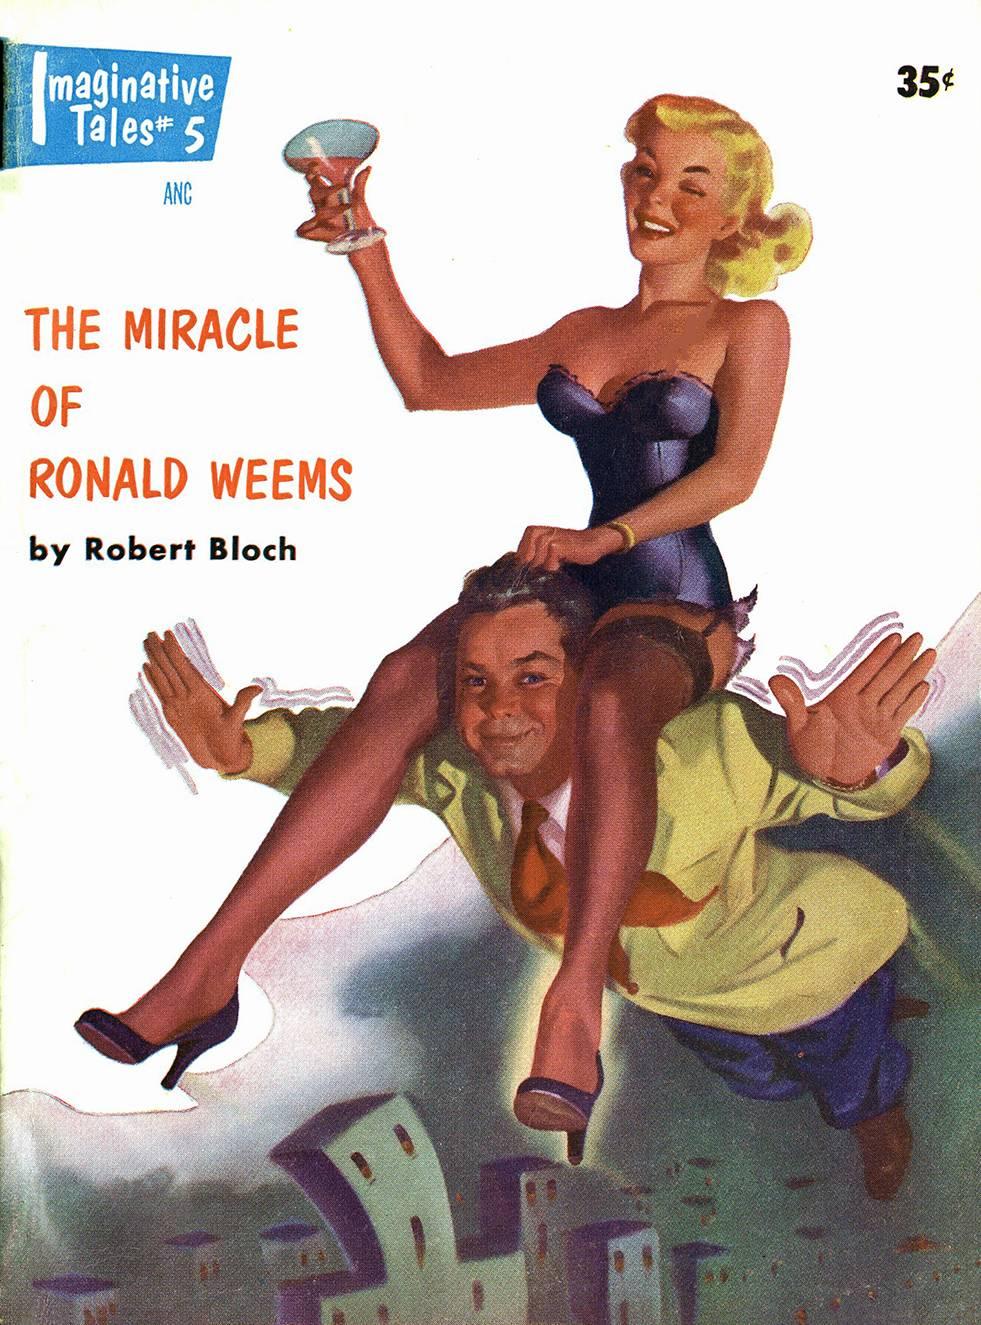 A jovial, large format oil painting by Harold H.W. McCauley which appeared as the May 1955 cover of Imaginative Tales, a Greenleaf Publishing title. The image is a whimsical self-portrait, the artist appears as the 1950s everyman enjoying a night on